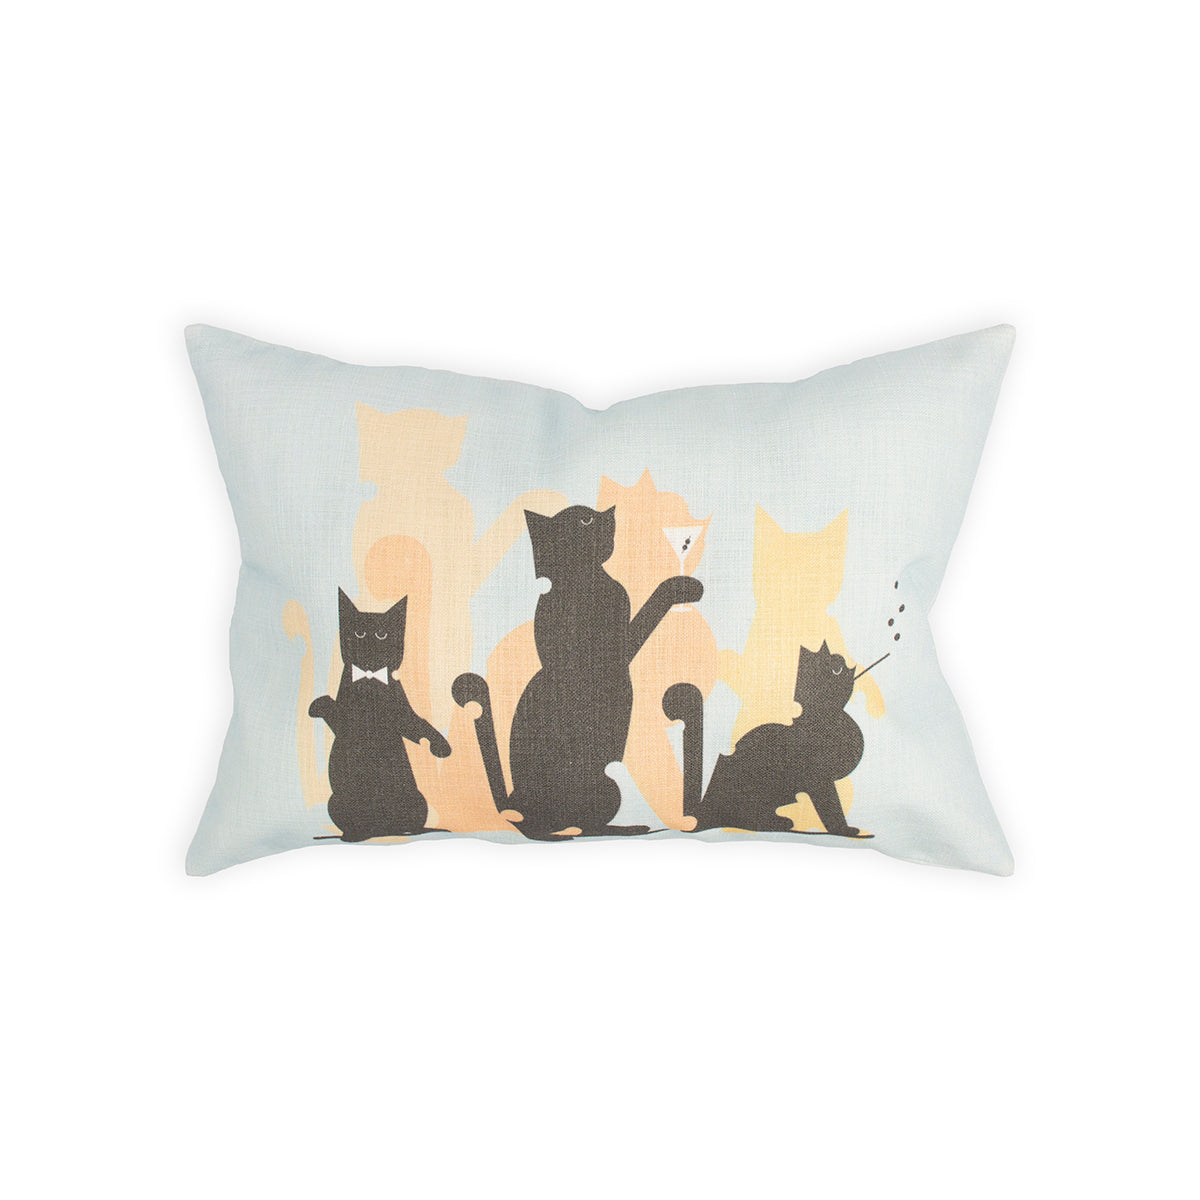 14" x 20" 100% cotton pillow case cover in light grey featuring three silhouettes of cats in black and shades of orange